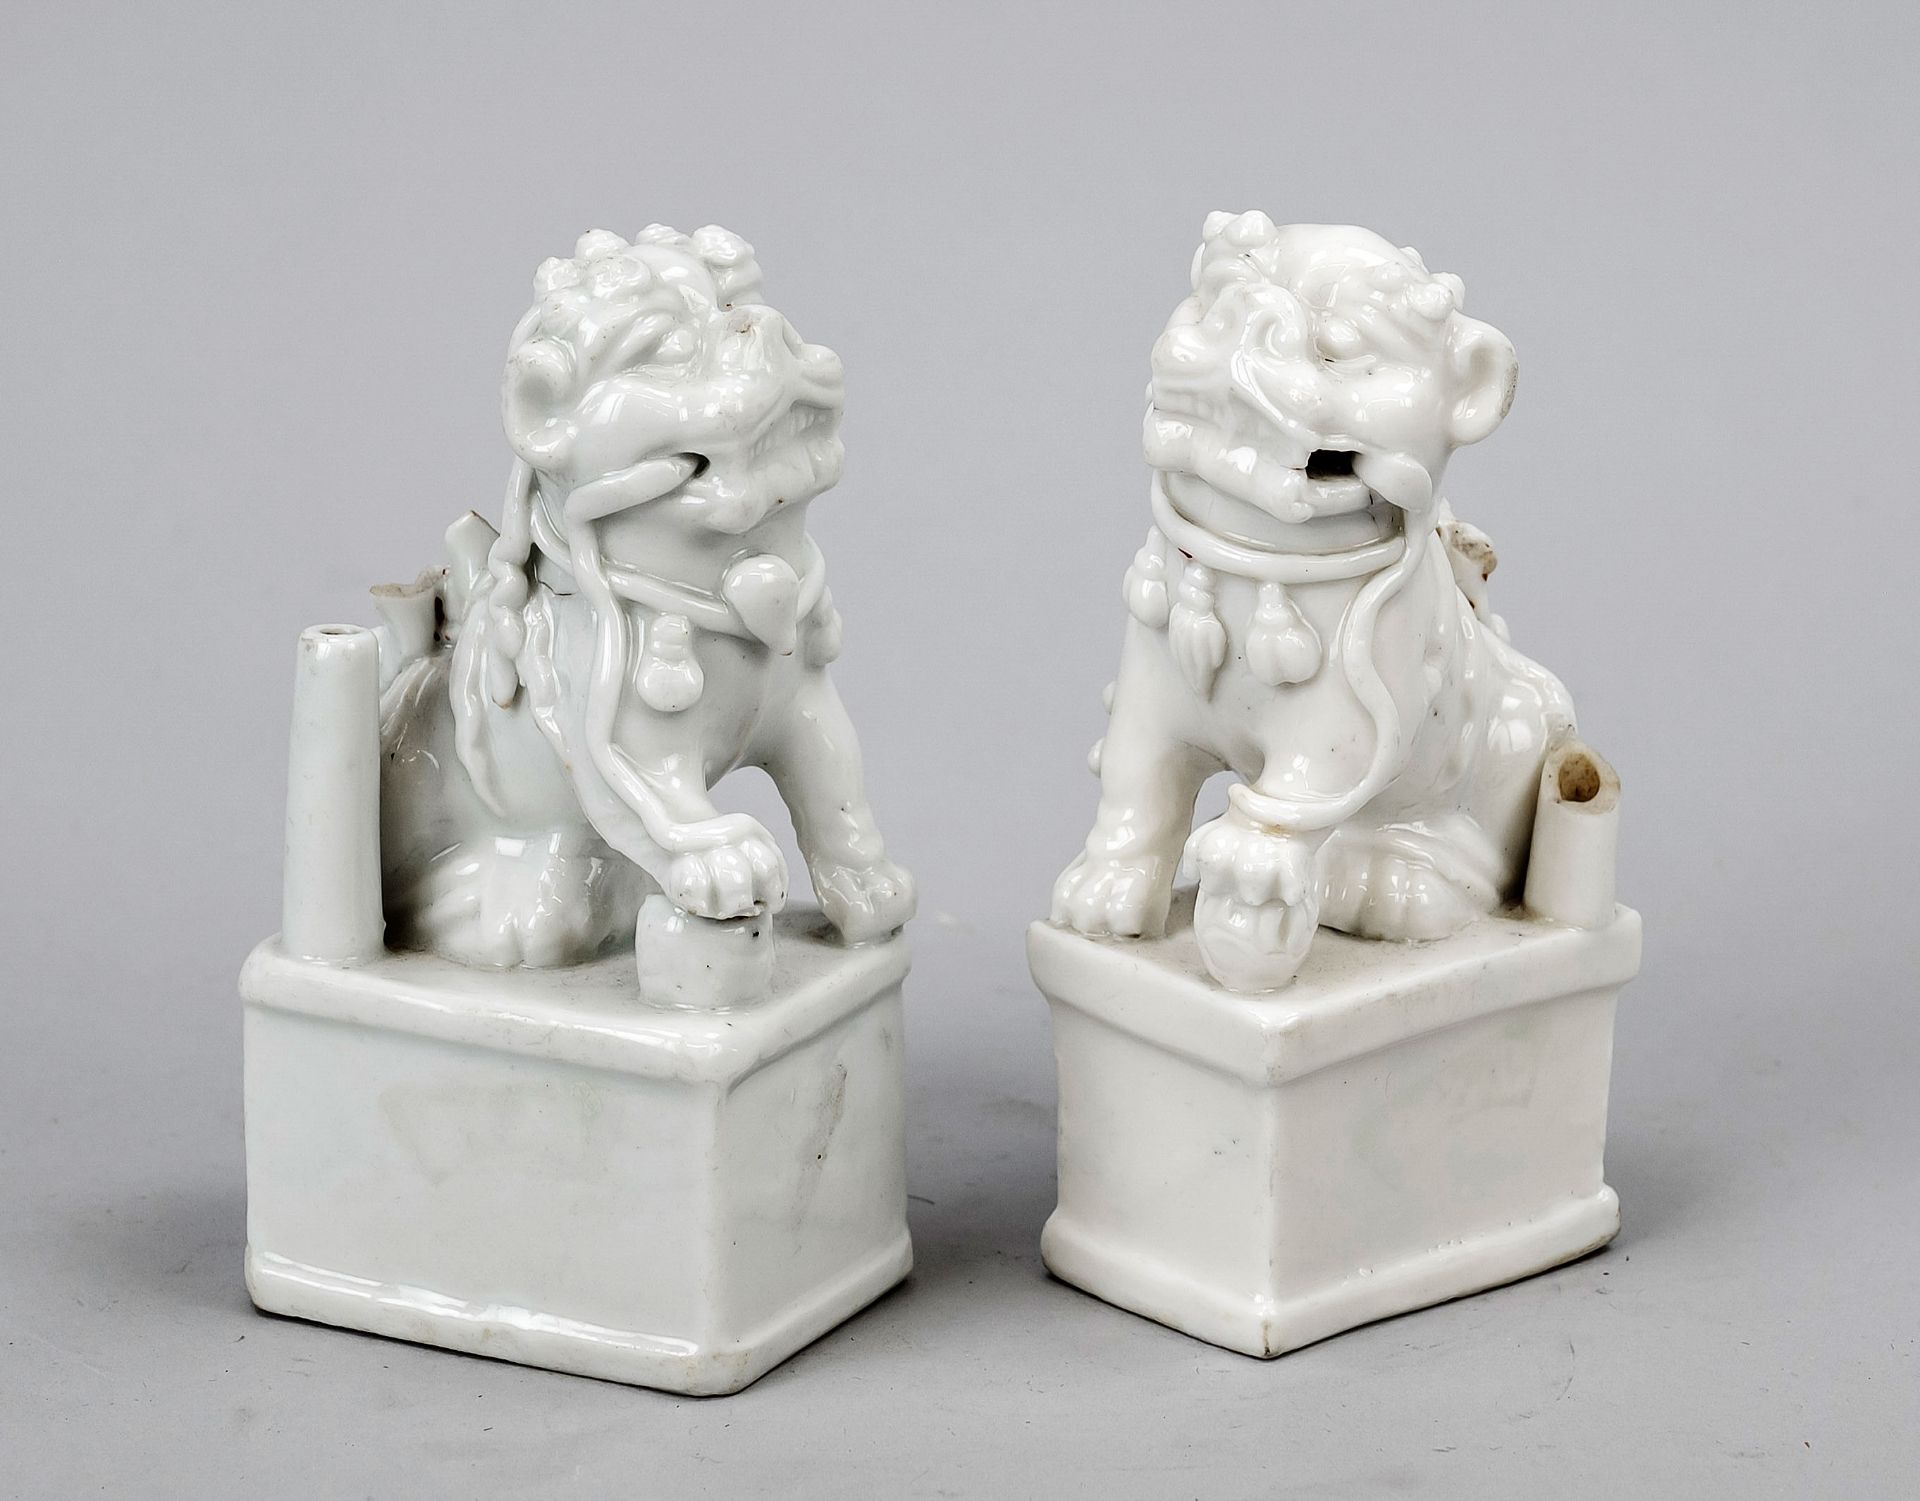 A pair of Blanc de Chine guardian figures, China (Dehua), probably 18th century, both heavily